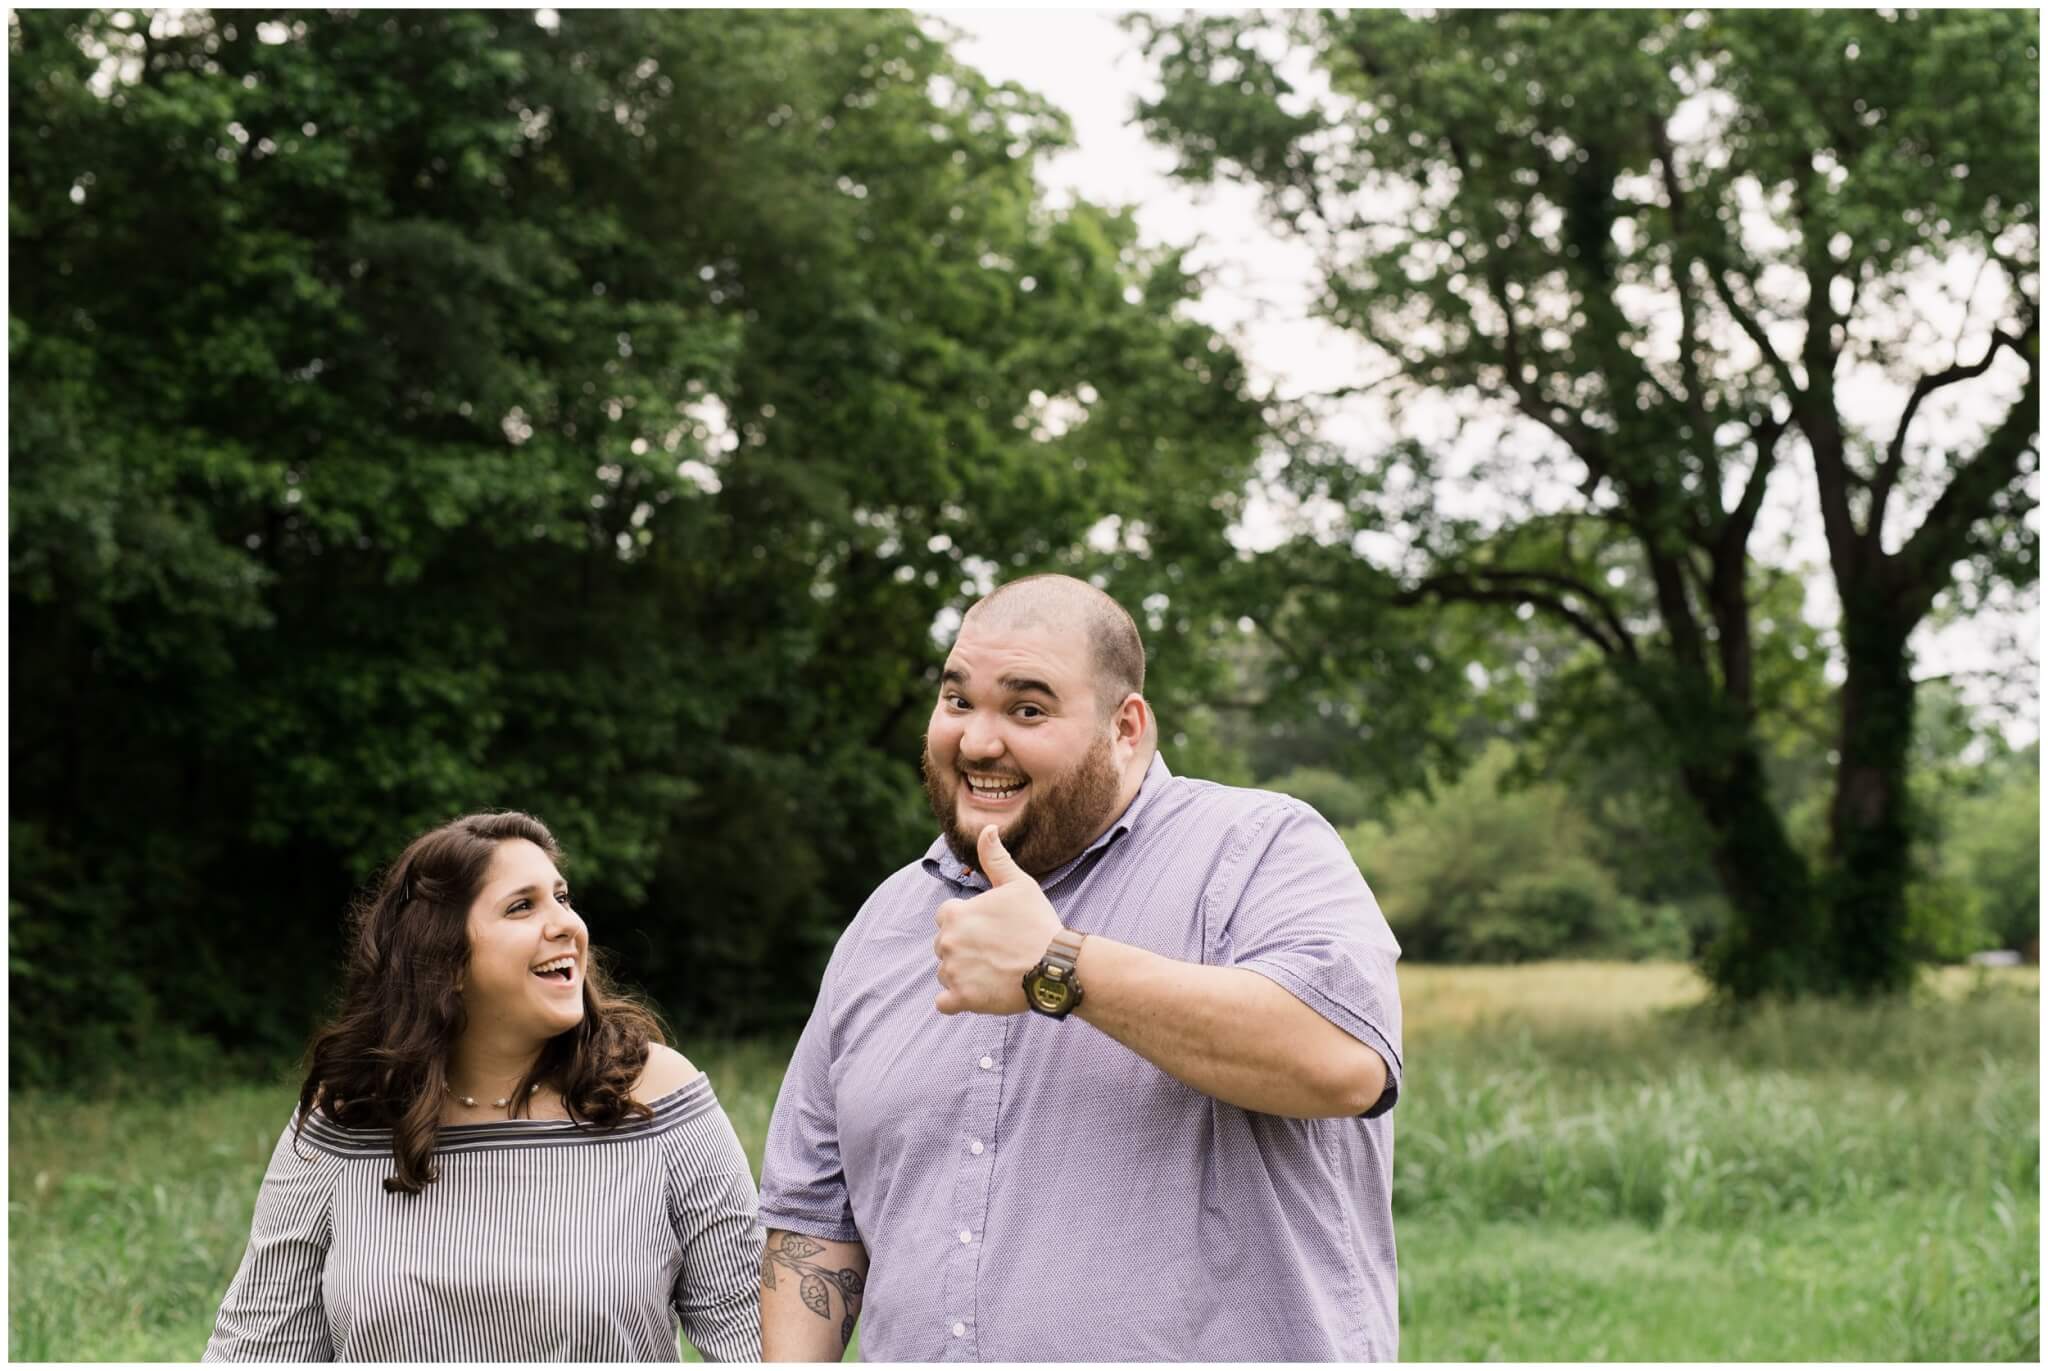 thumbs up from fiance treehouse vineyard engagement photos